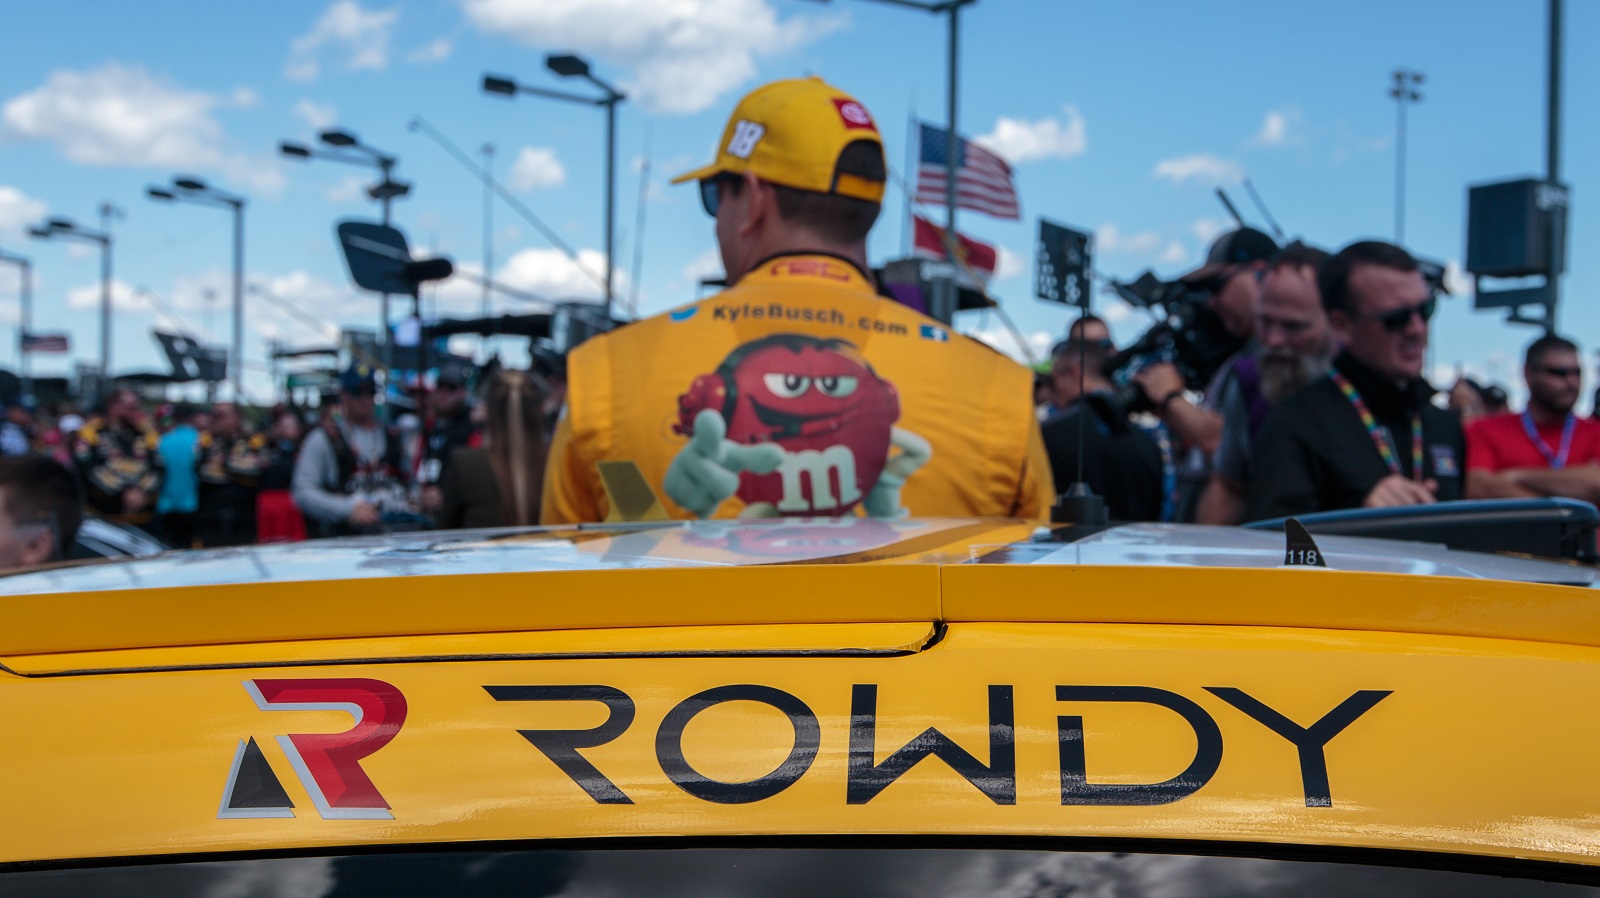 Kyle Busch behind his car on pit road prior to the NASCAR Cup Series Hollywood Casino 400 on Sept. 11, 2022, at the Kansas Speedway in Kansas City, Kansas. | William Purnell/Icon Sportswire via Getty Images